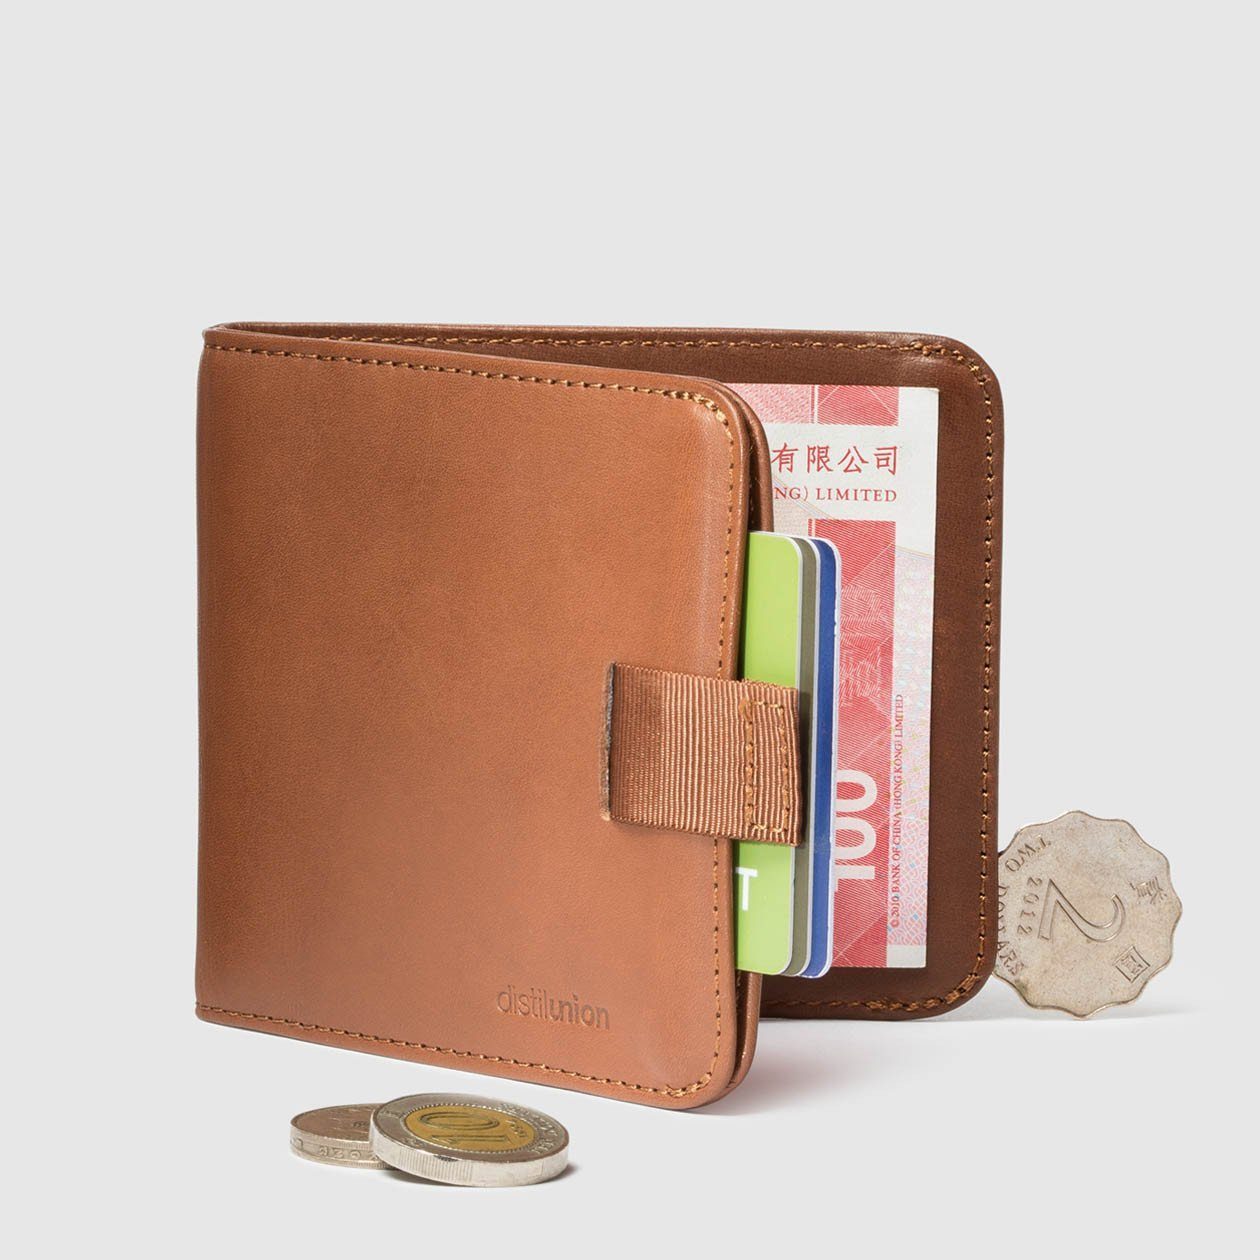 coins around distil hickory leather bifold travel wallet half open with pull-tab